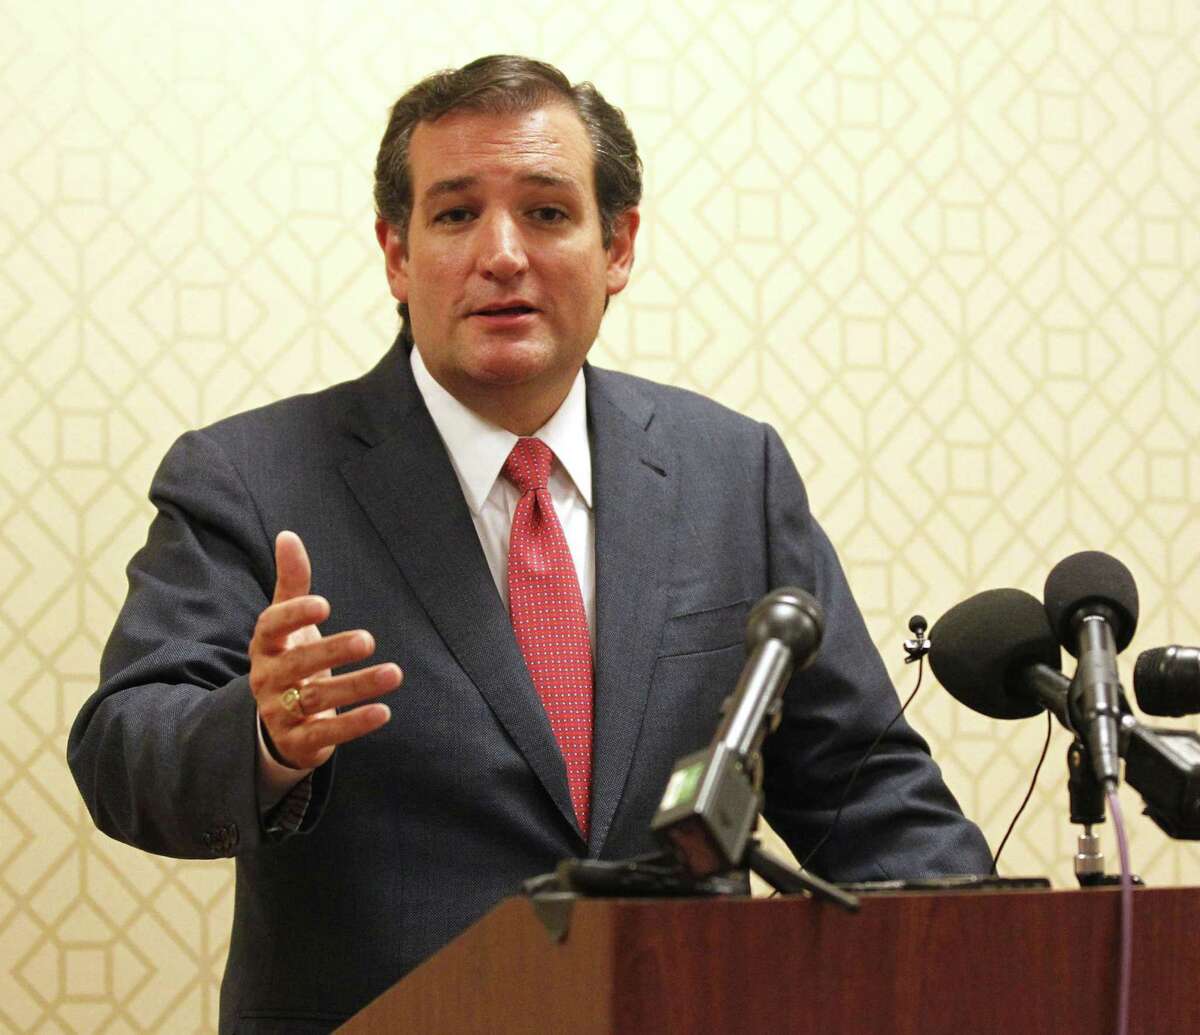 Sen. Ted Cruz (R-Texas) talks to the media before speaking with the Heritage Foundation at the Hilton Anatole Hotel in Dallas, Texas, Tuesday, August 20, 2013. Cruz discussed the push to remove funding for federal health care law. (Michael Ainsworth/Dallas Morning News/MCT)